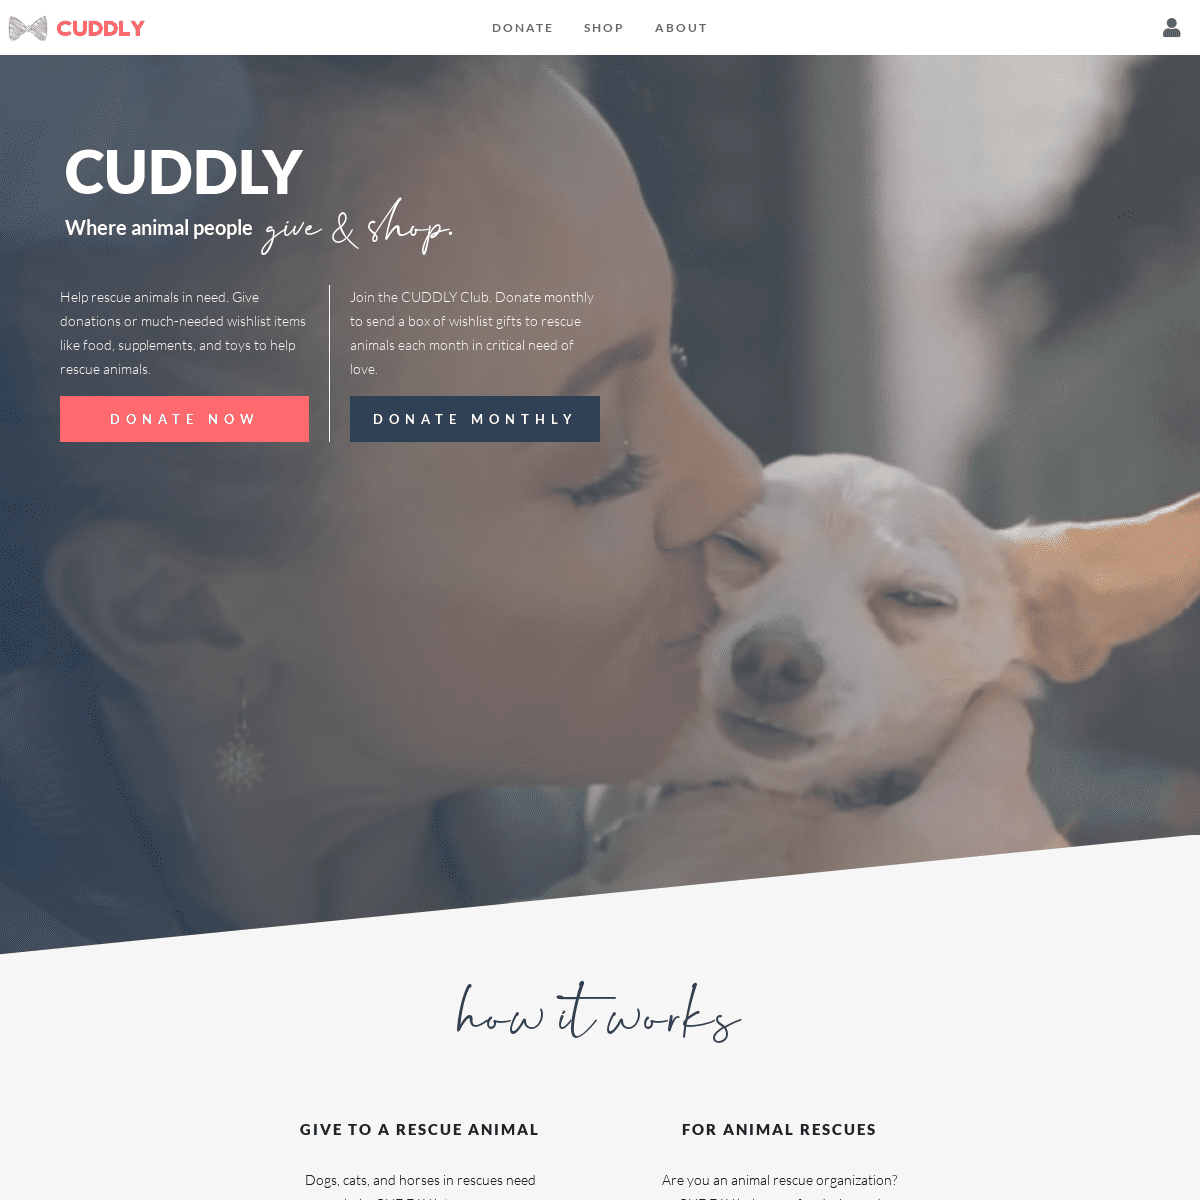 A complete backup of cuddly.com